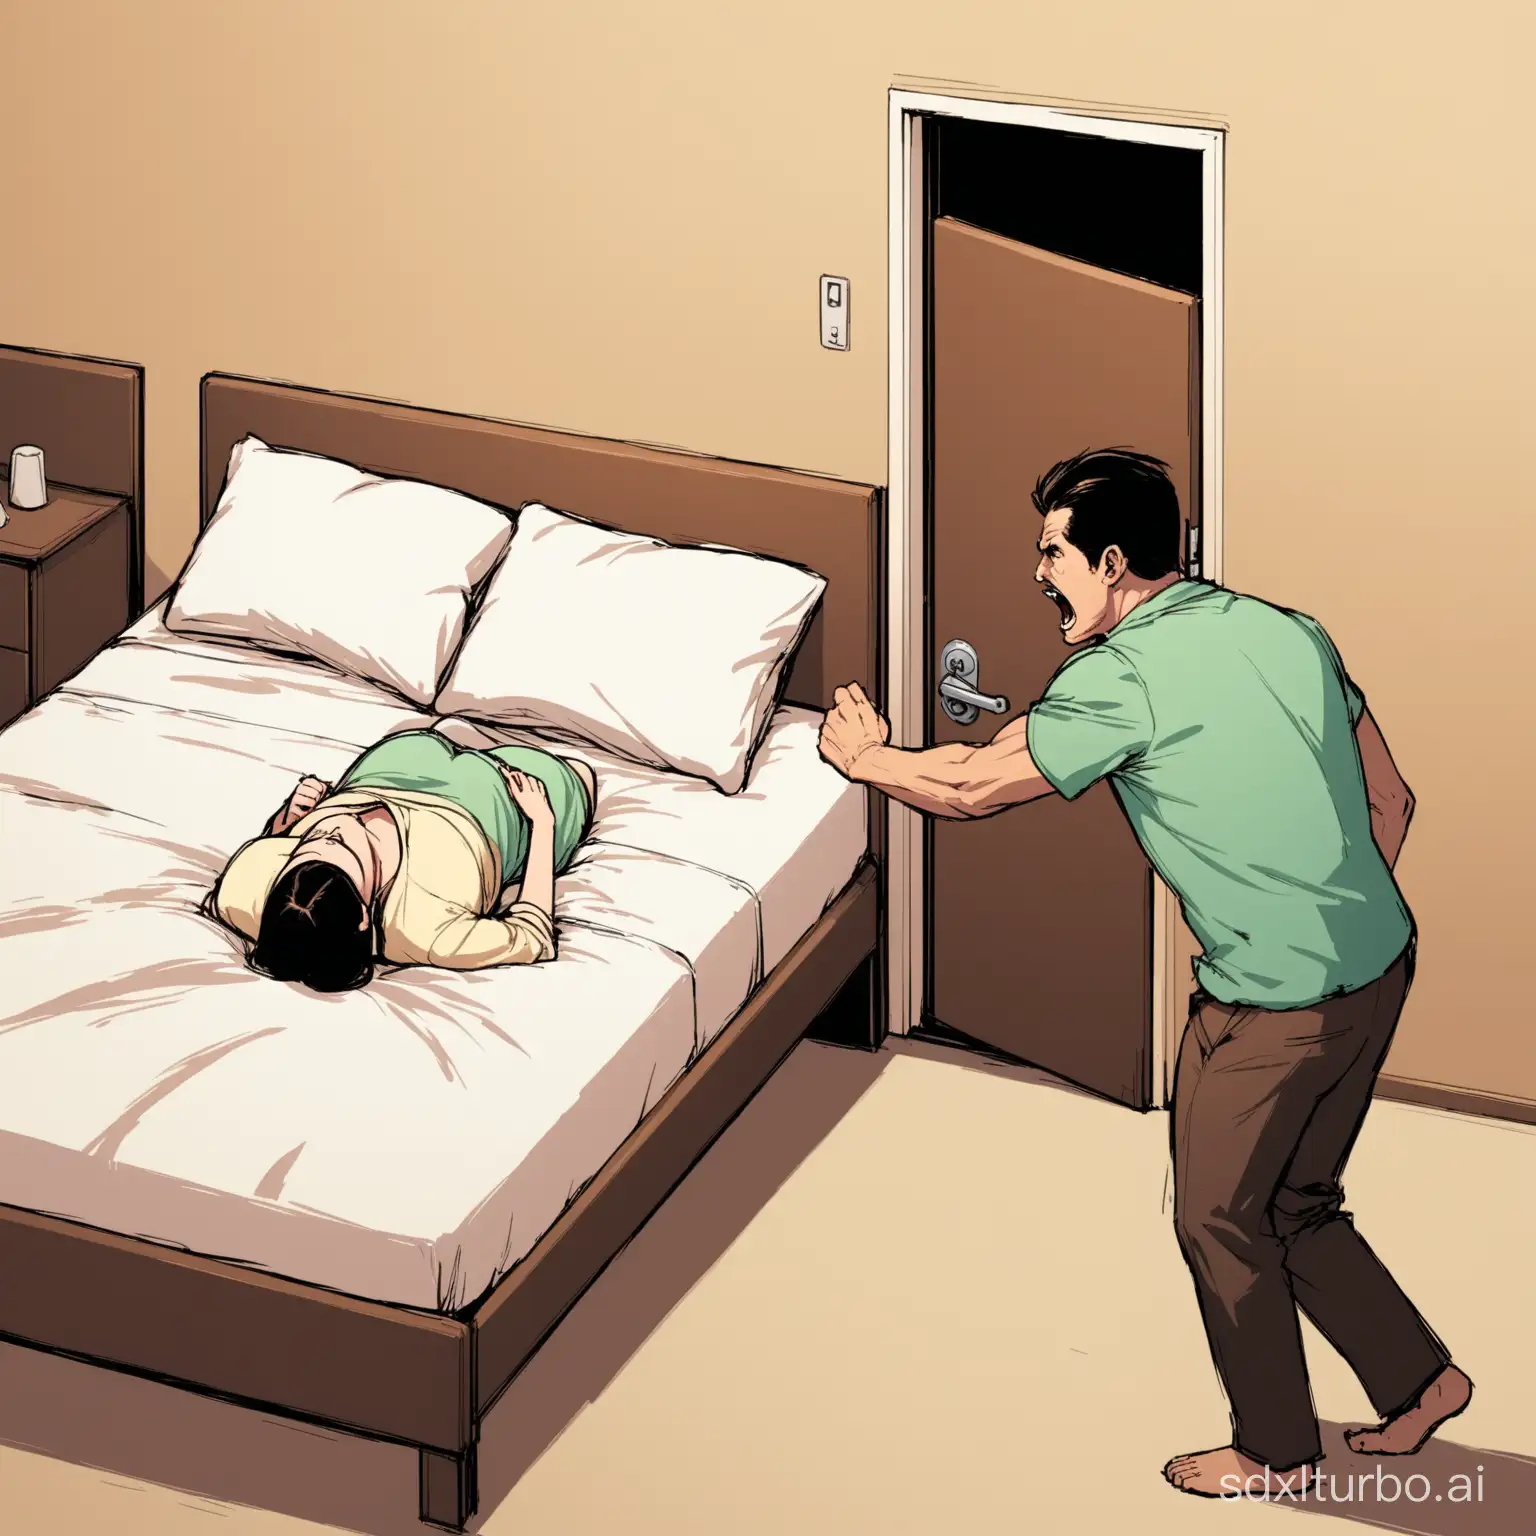 Man-Discovers-Wife-Cheating-in-Bed-with-Another-Man